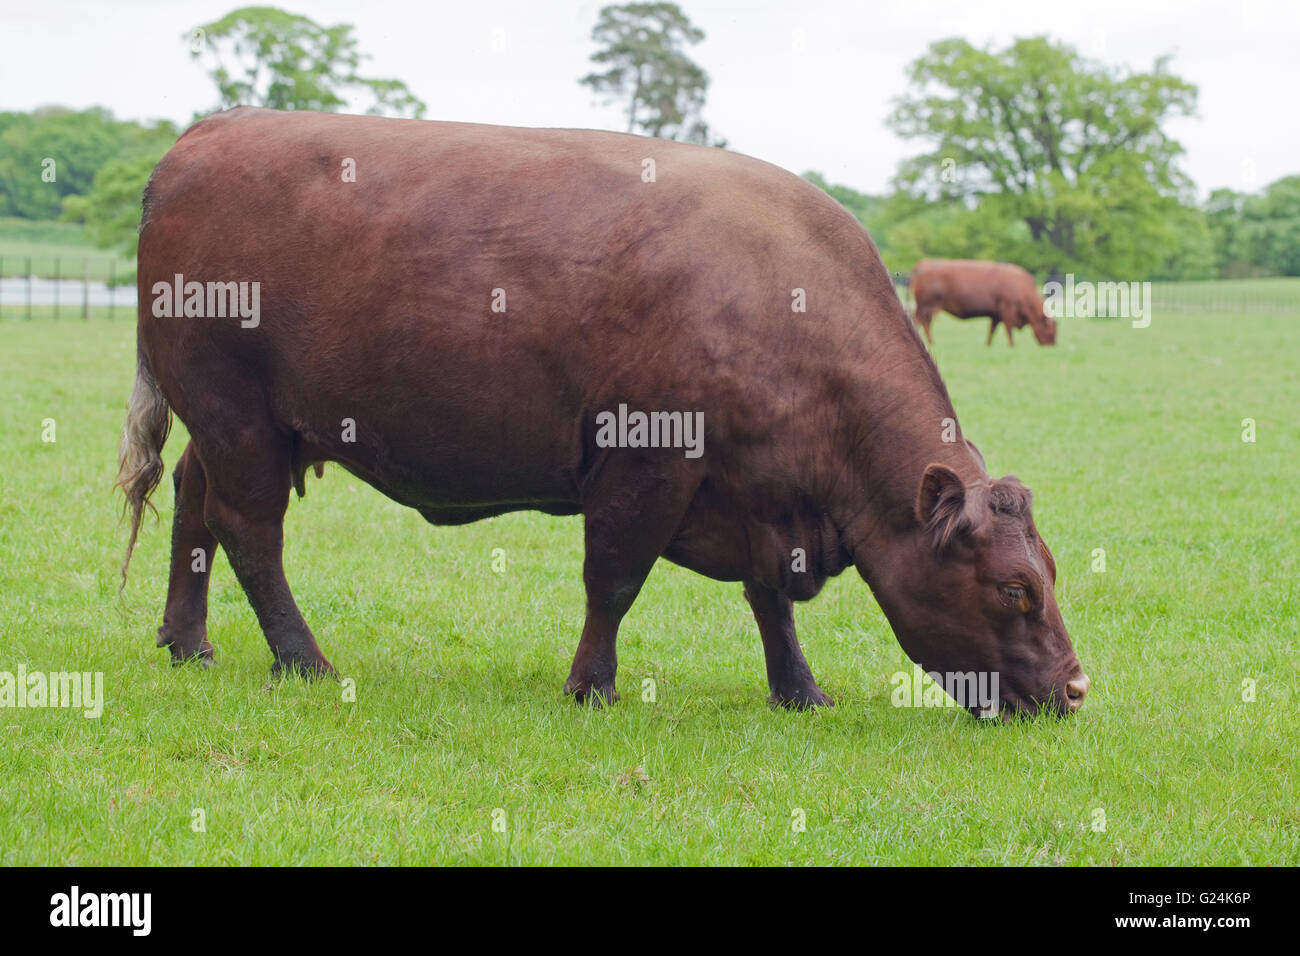 Sussex Cow (Bos primigenius). Grazing. Beef rare breed. Historically bred as a draught animal. Park. Norfolk. England. Stock Photo